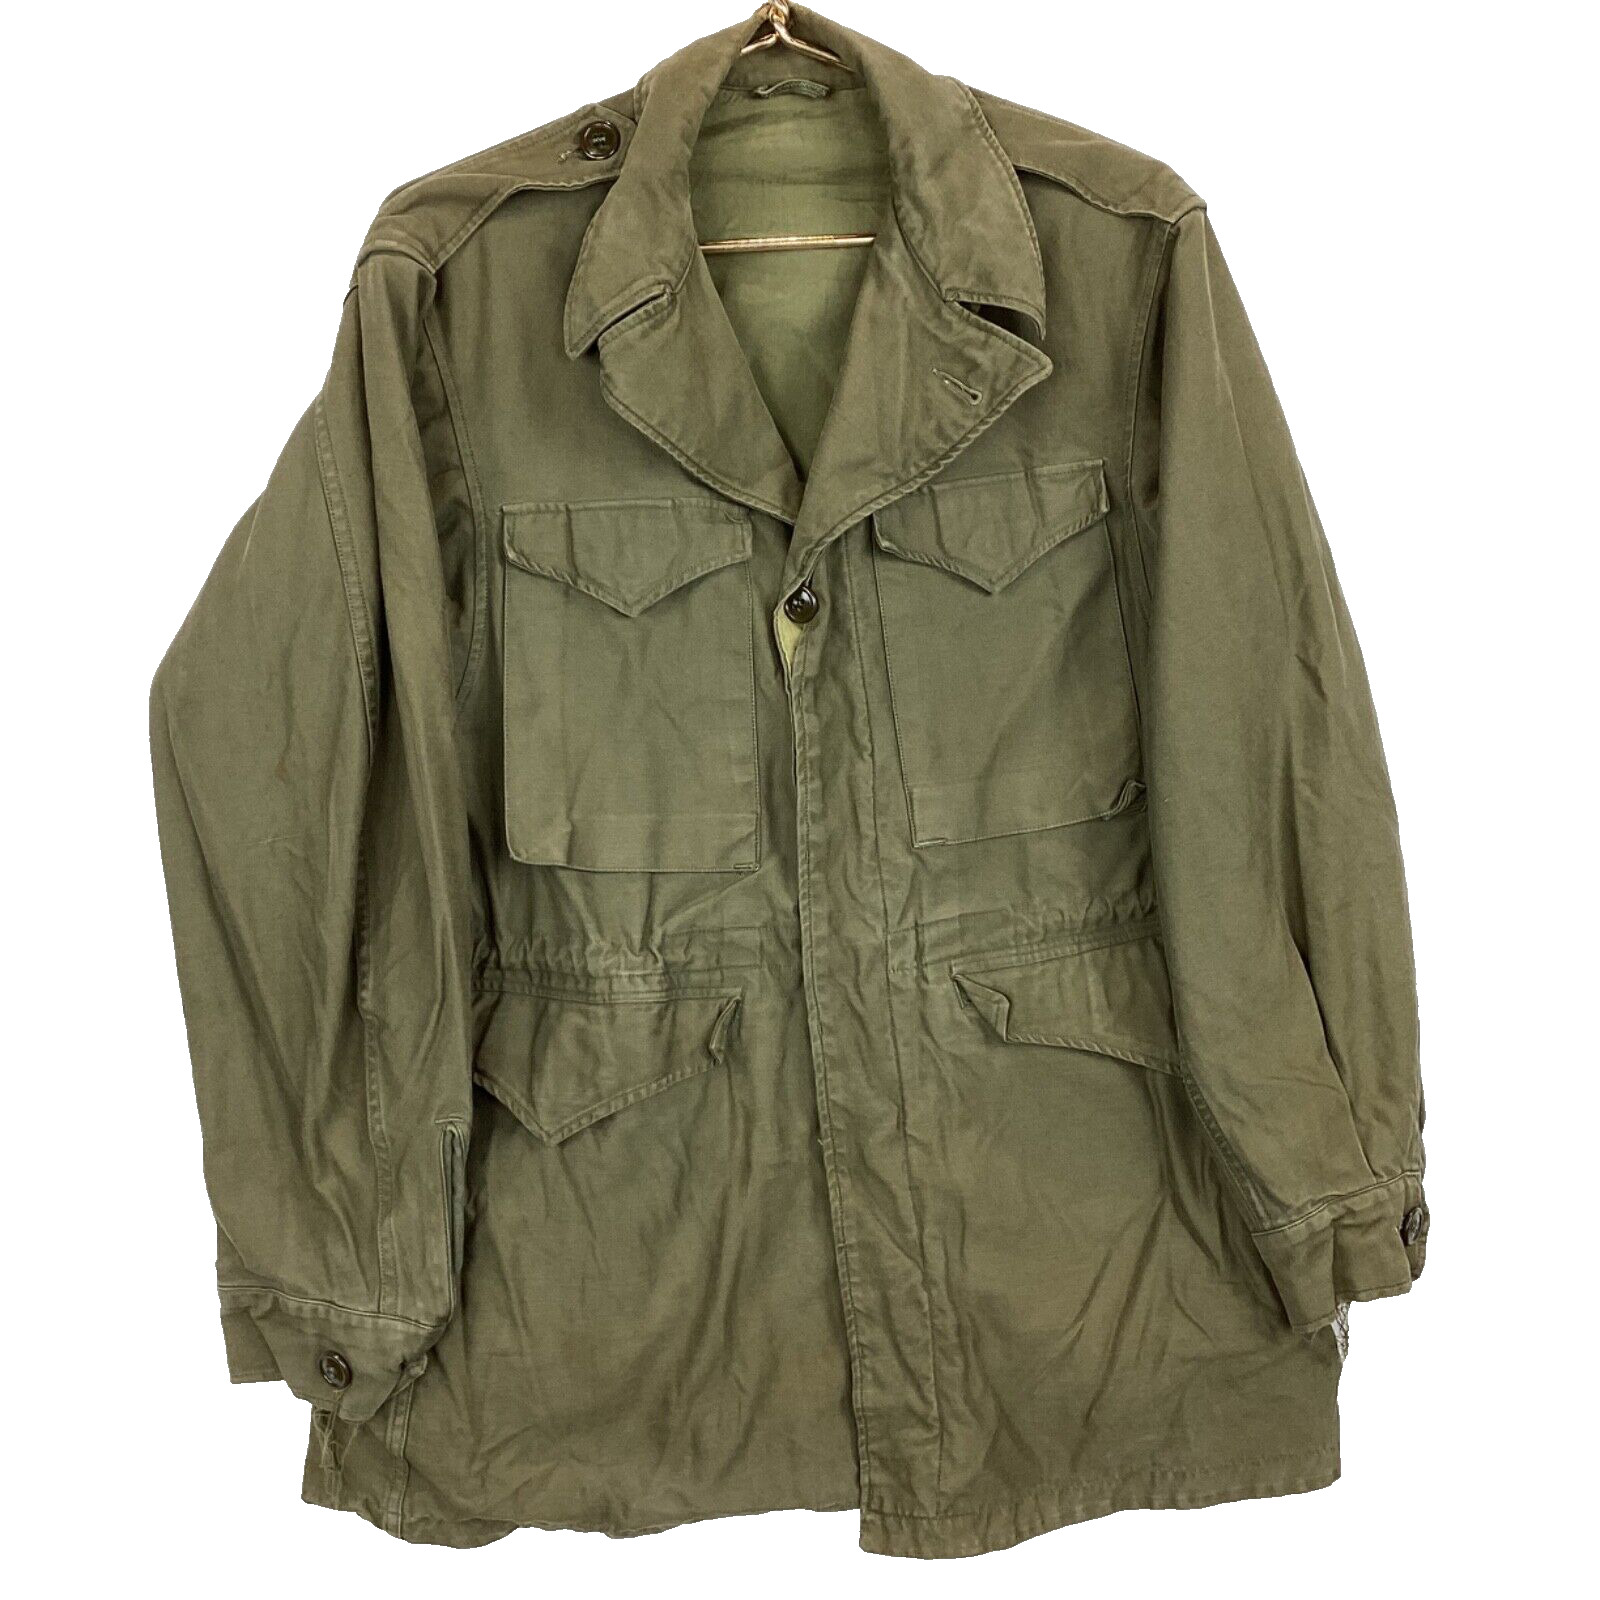 Vintage Military Field Coat Size Small Button Up Green Vietnam Era 60s 70s